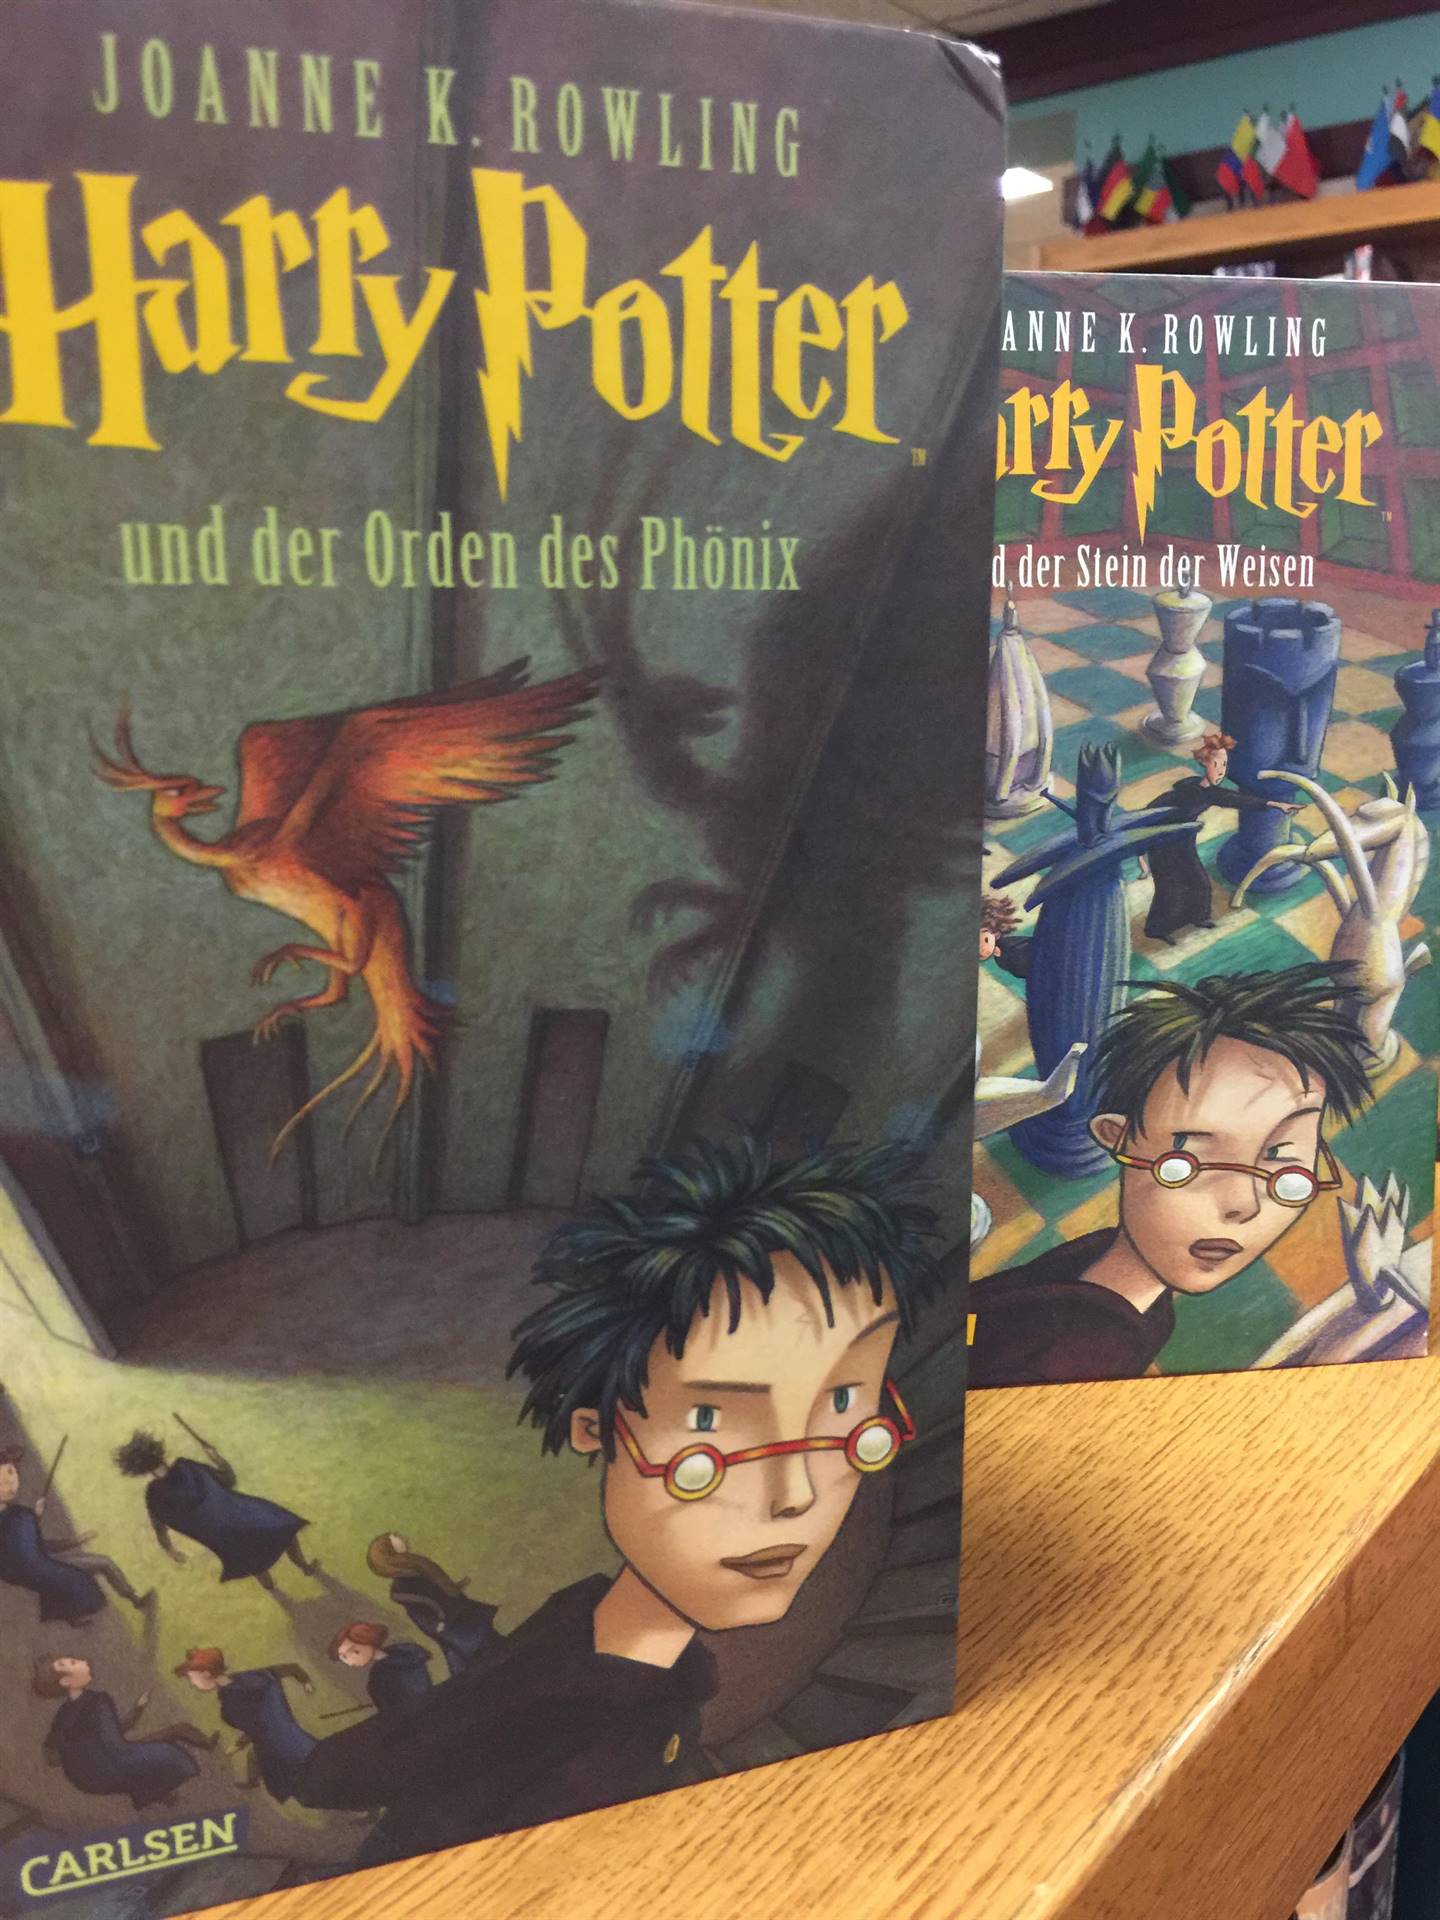 Two Harry Potter books in German